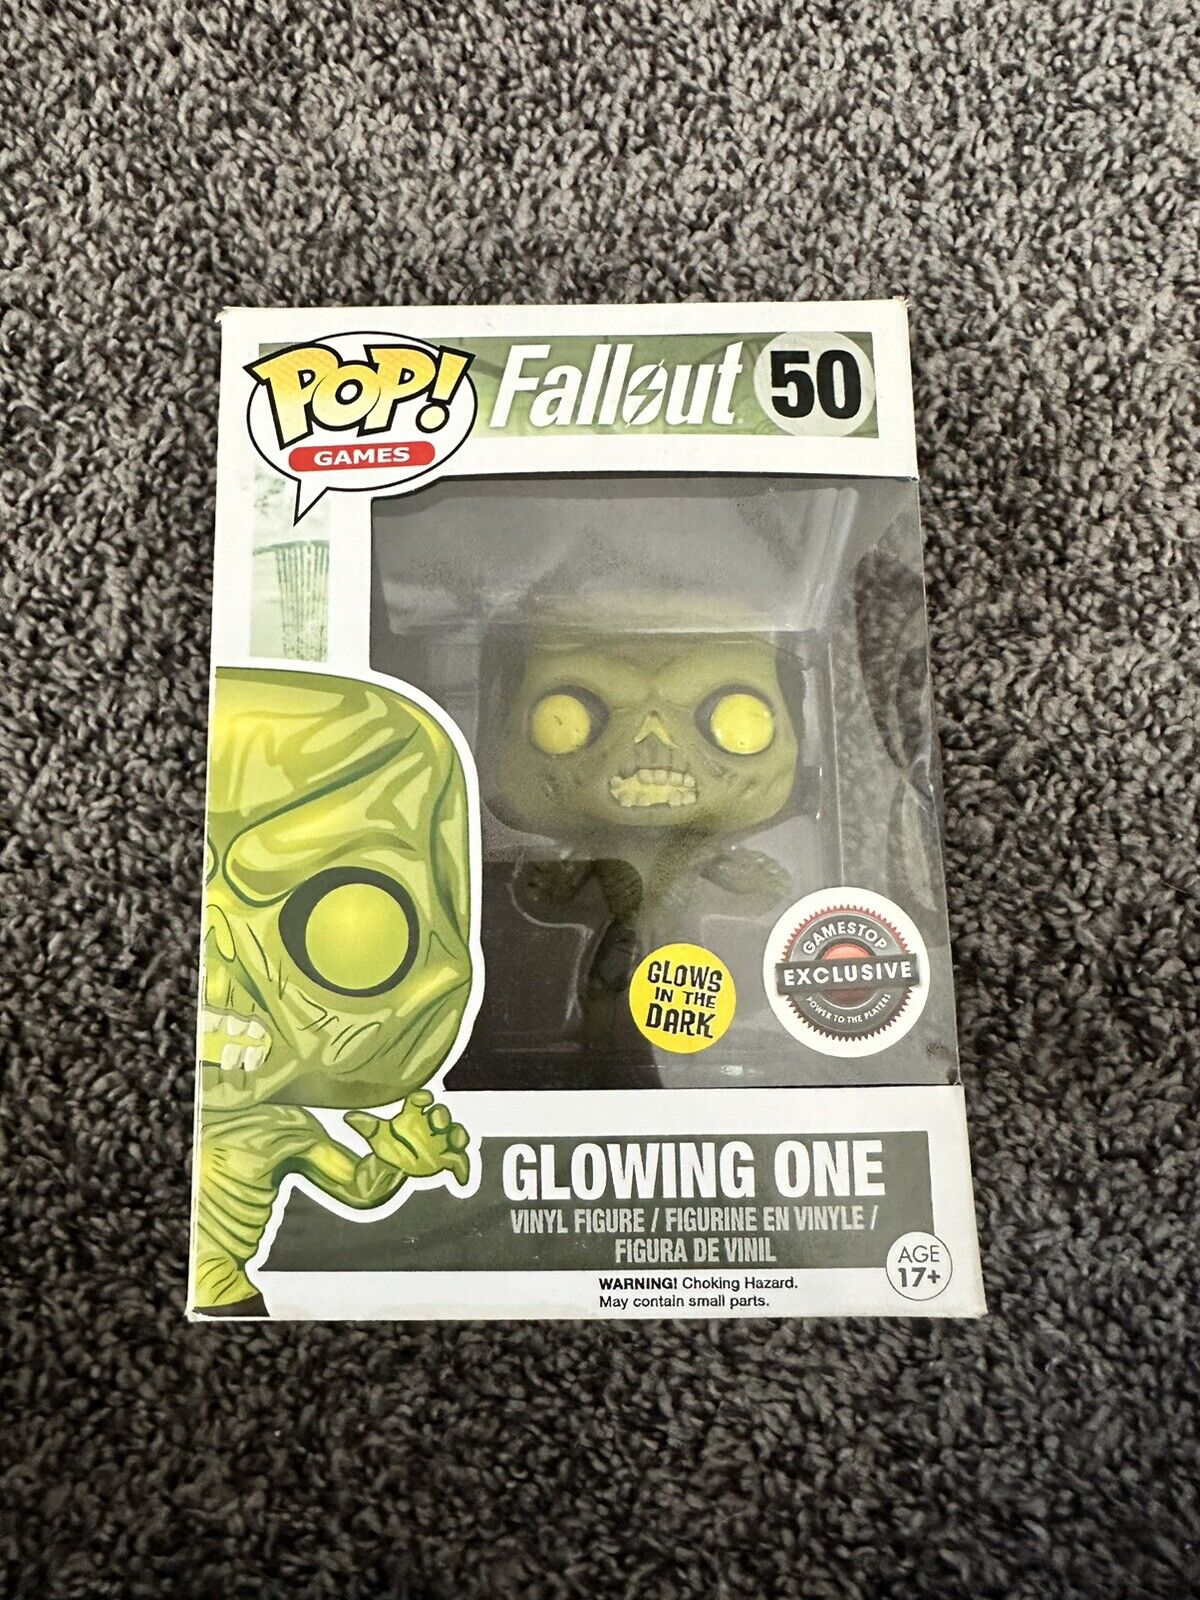 Fallout Vinyl Glowing One #50 Funko Pop Exclusive Glows In The Dark 